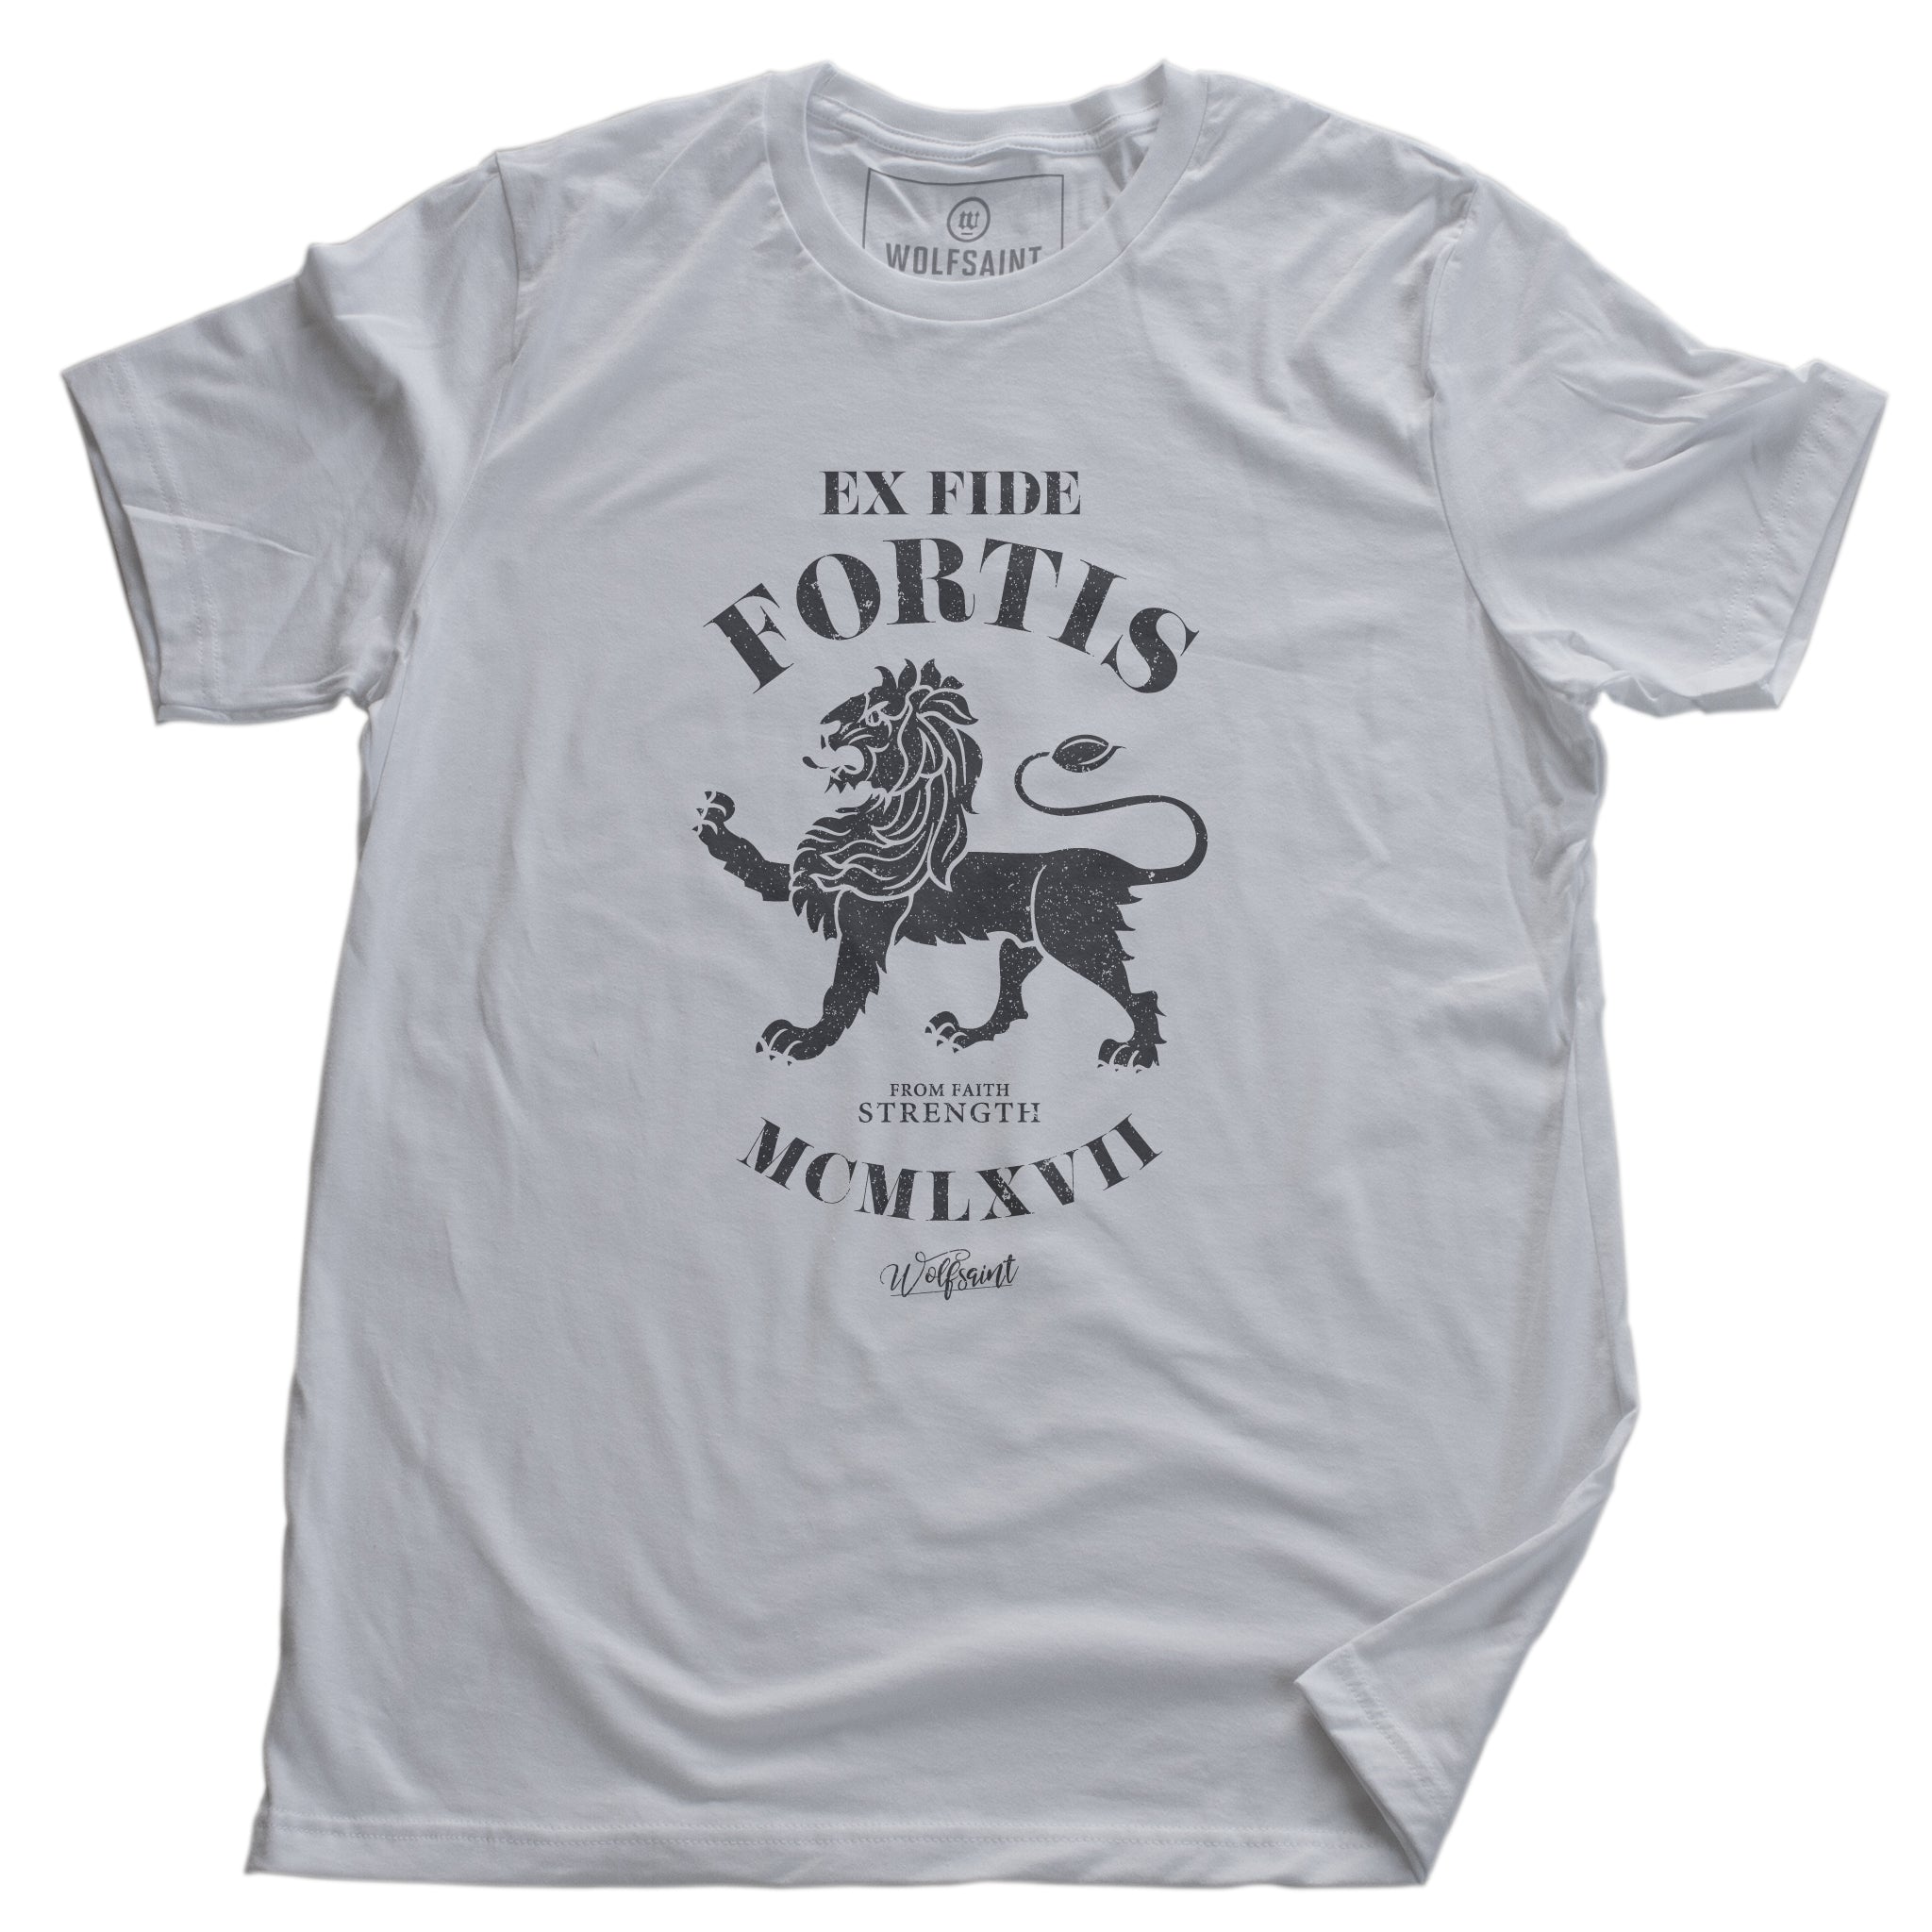 A vintage-inspired classic white retro t-shirt featuring a strong graphic of a lion, with the Latin phrase meaning “Out of faith, strength.” By wolfsaint.net